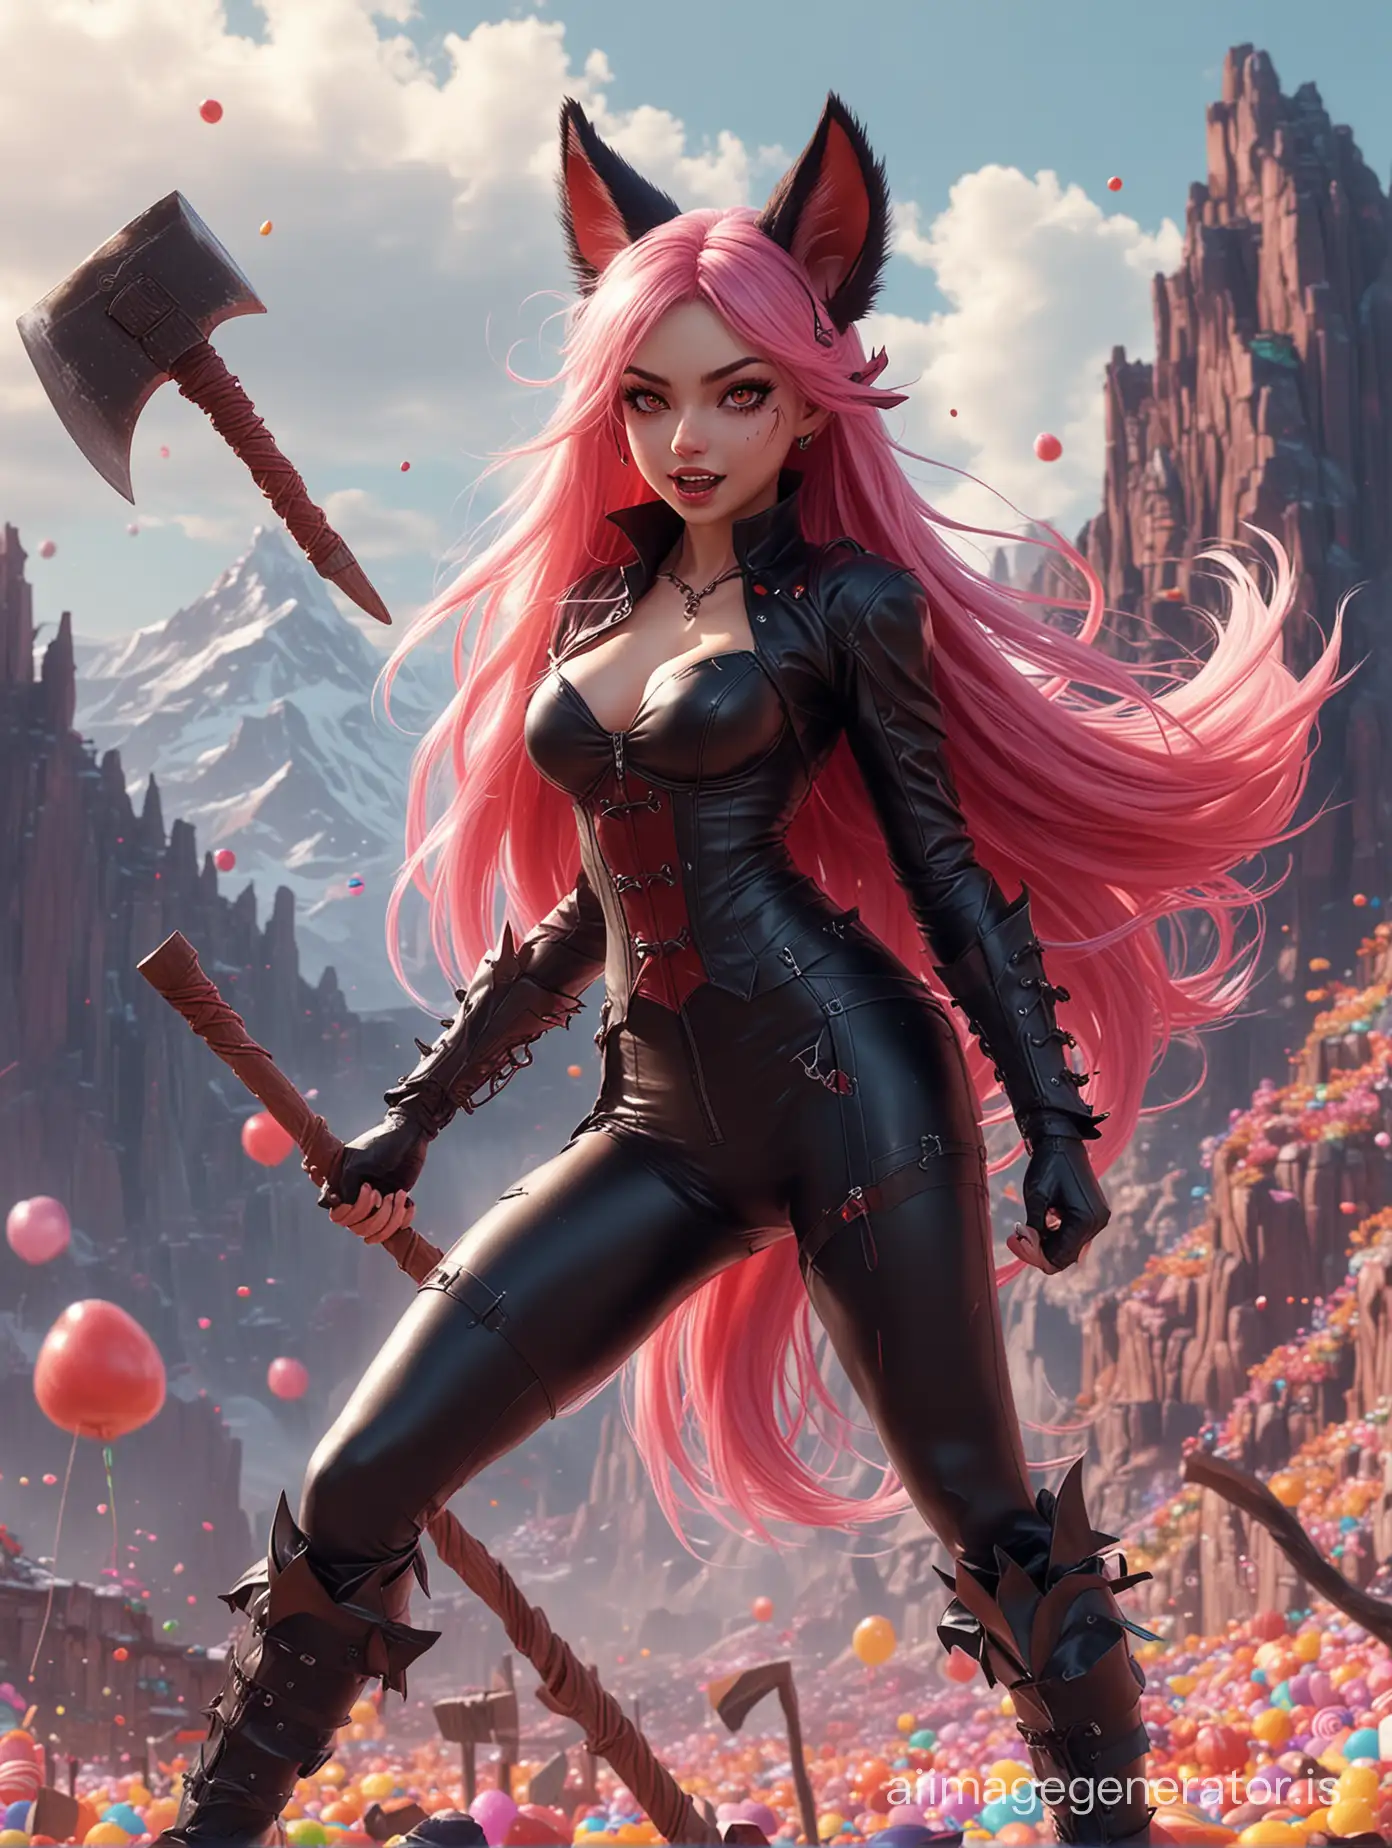 Fantasy-Anime-Illustration-Female-Vampire-with-Axe-in-Candy-Mountain-Landscape